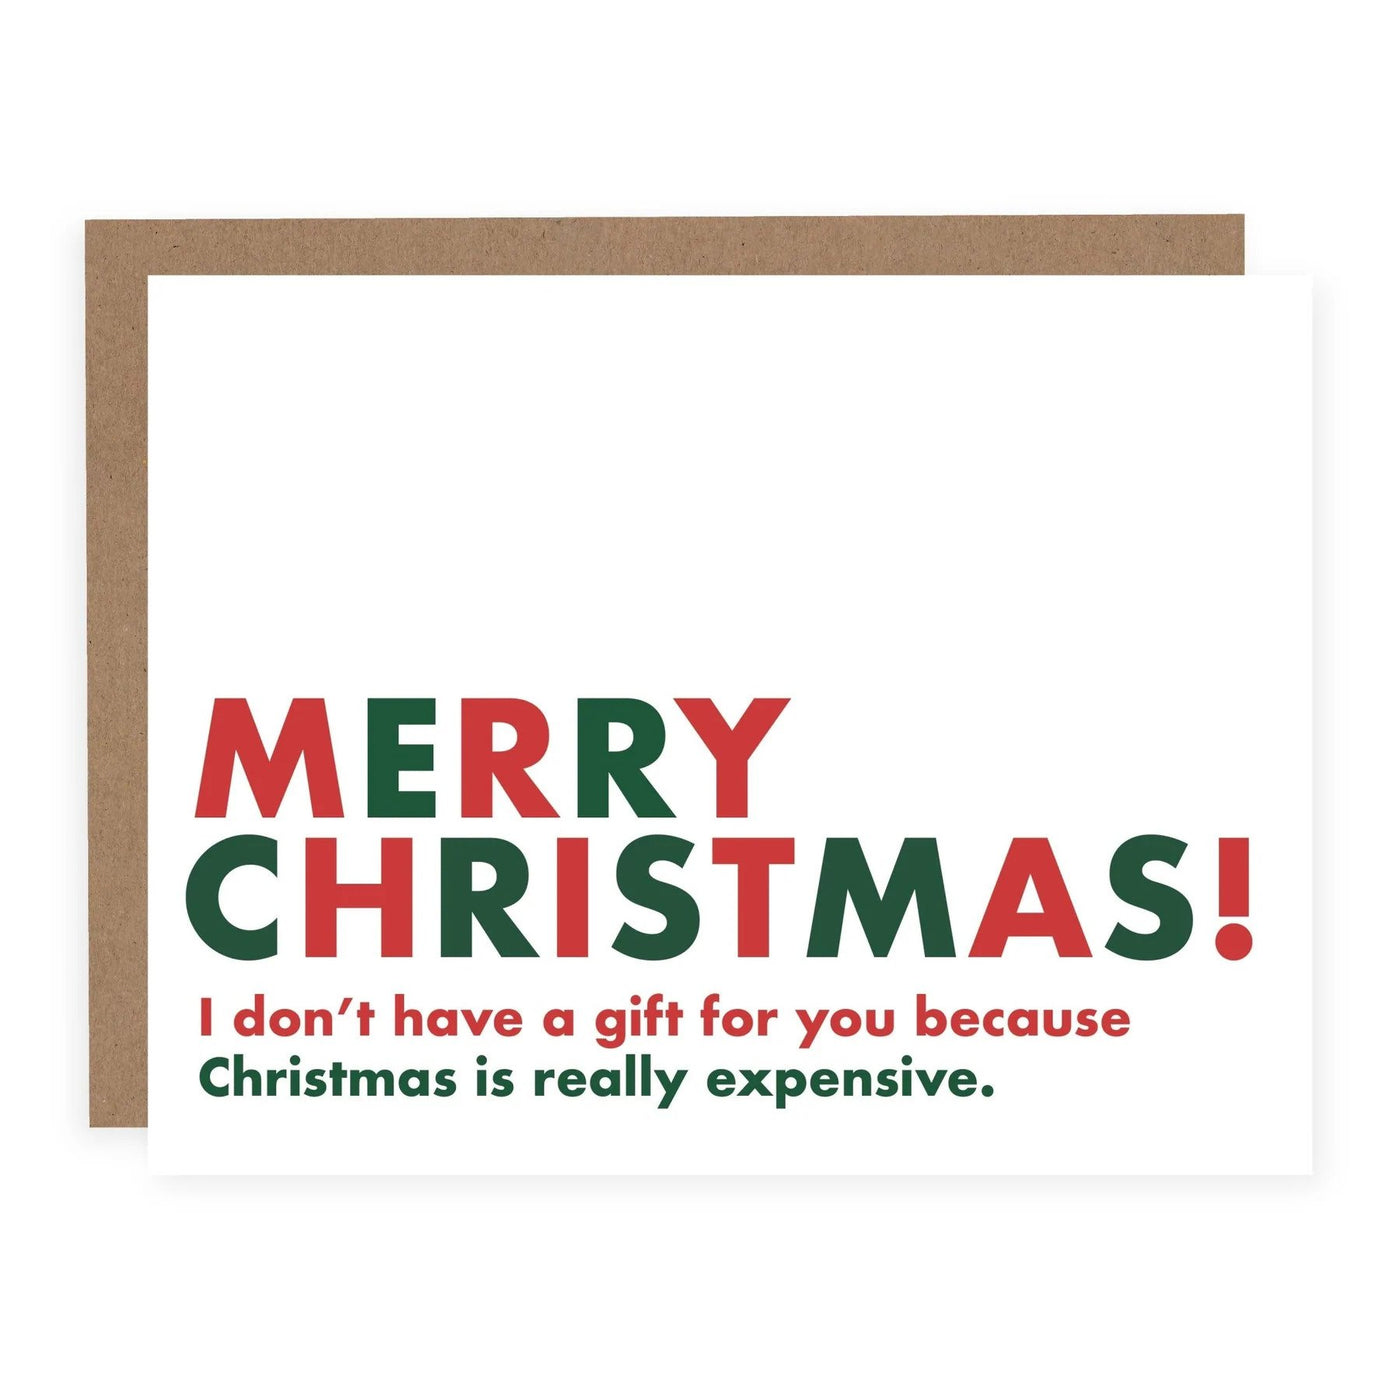 Christmas is Real Expensive Card